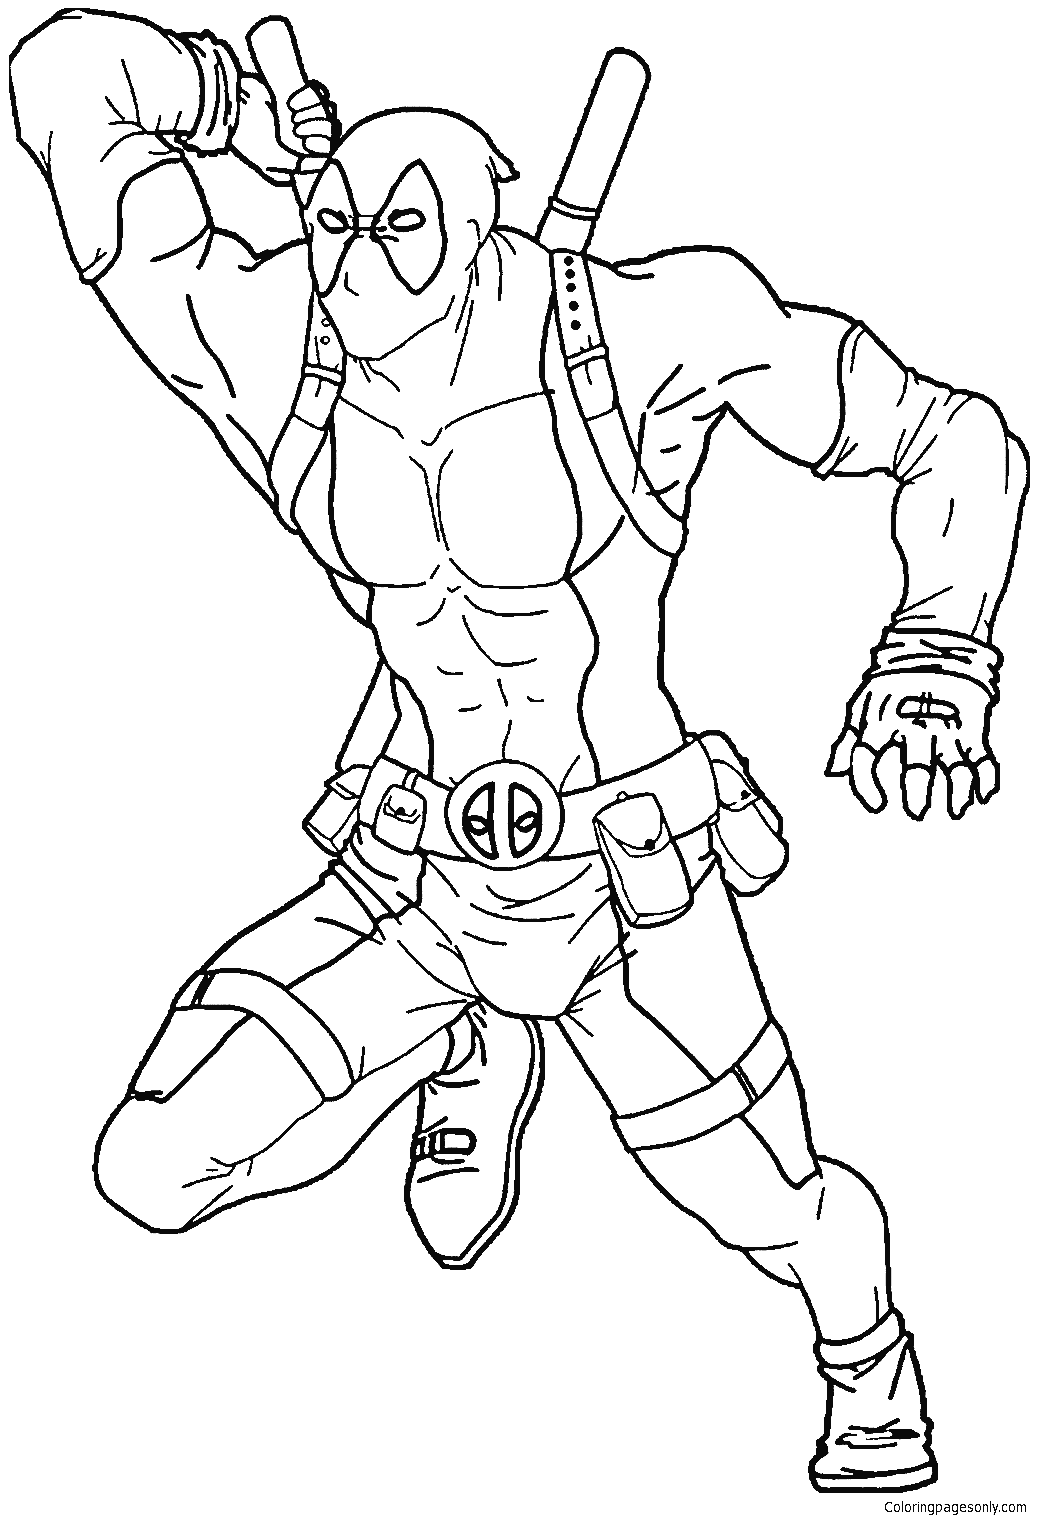 Deadpool 5 Coloring Page